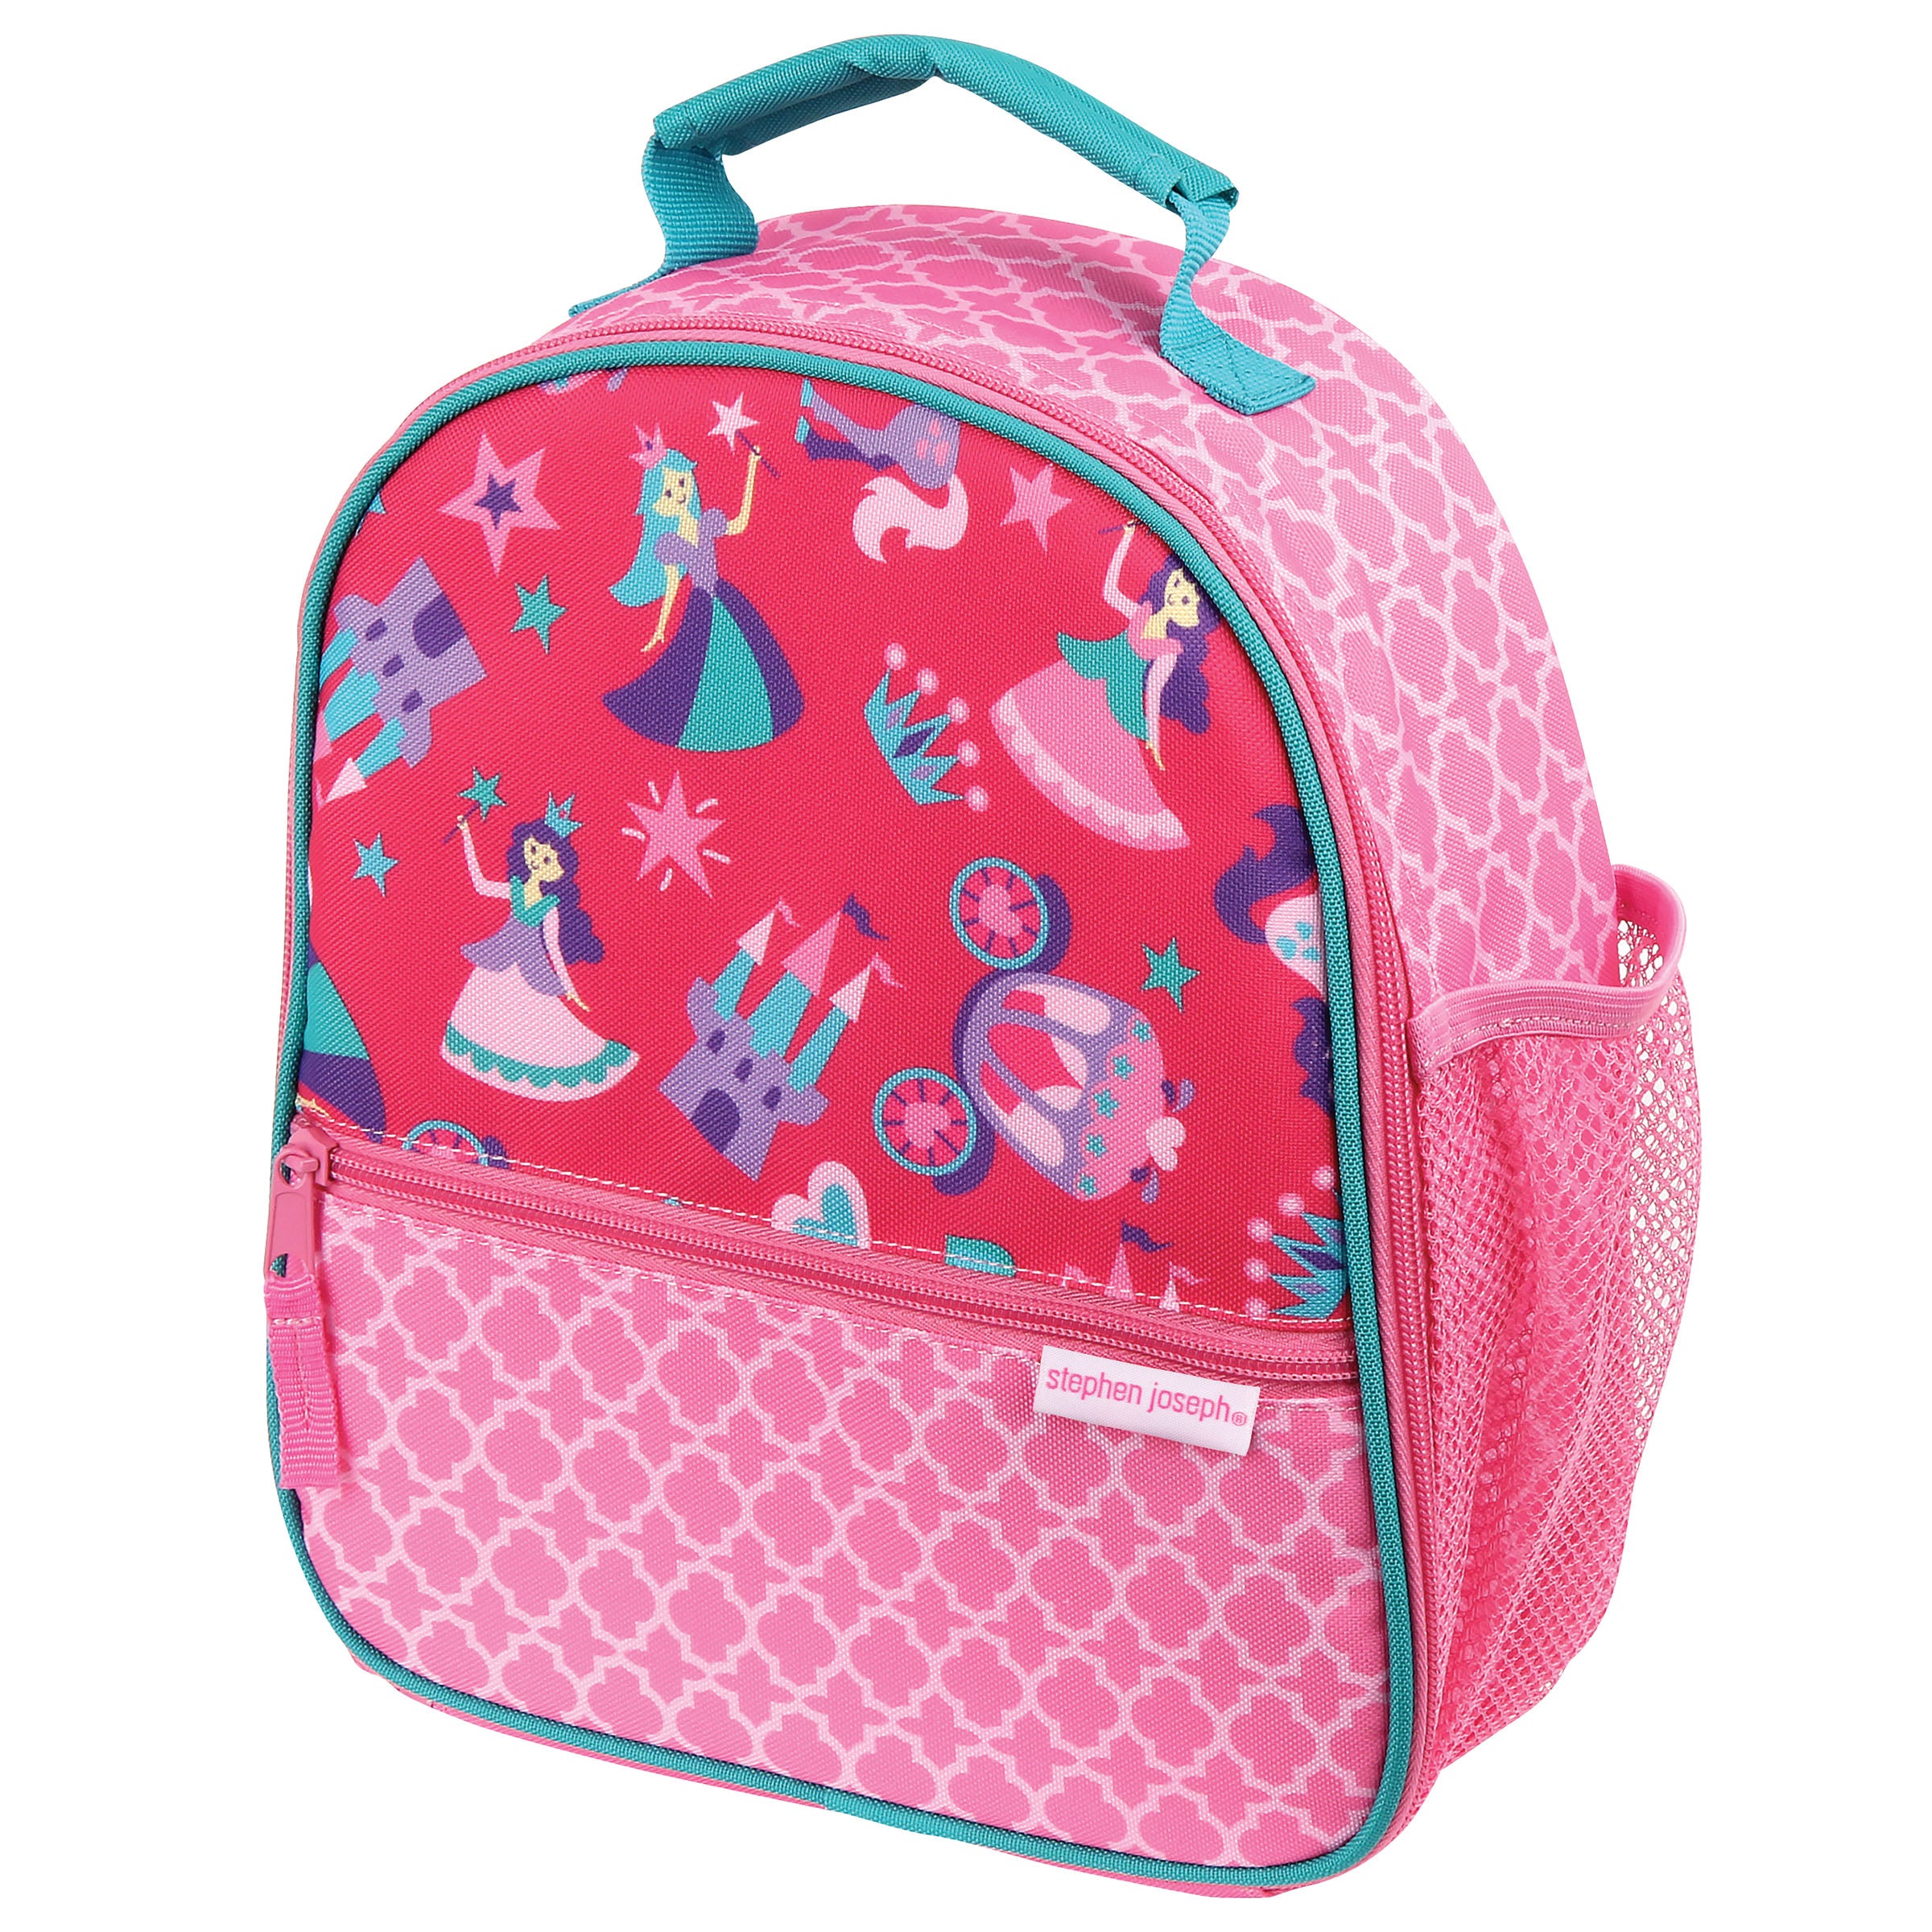 All Over Print Lunchbox - Princess/Castle